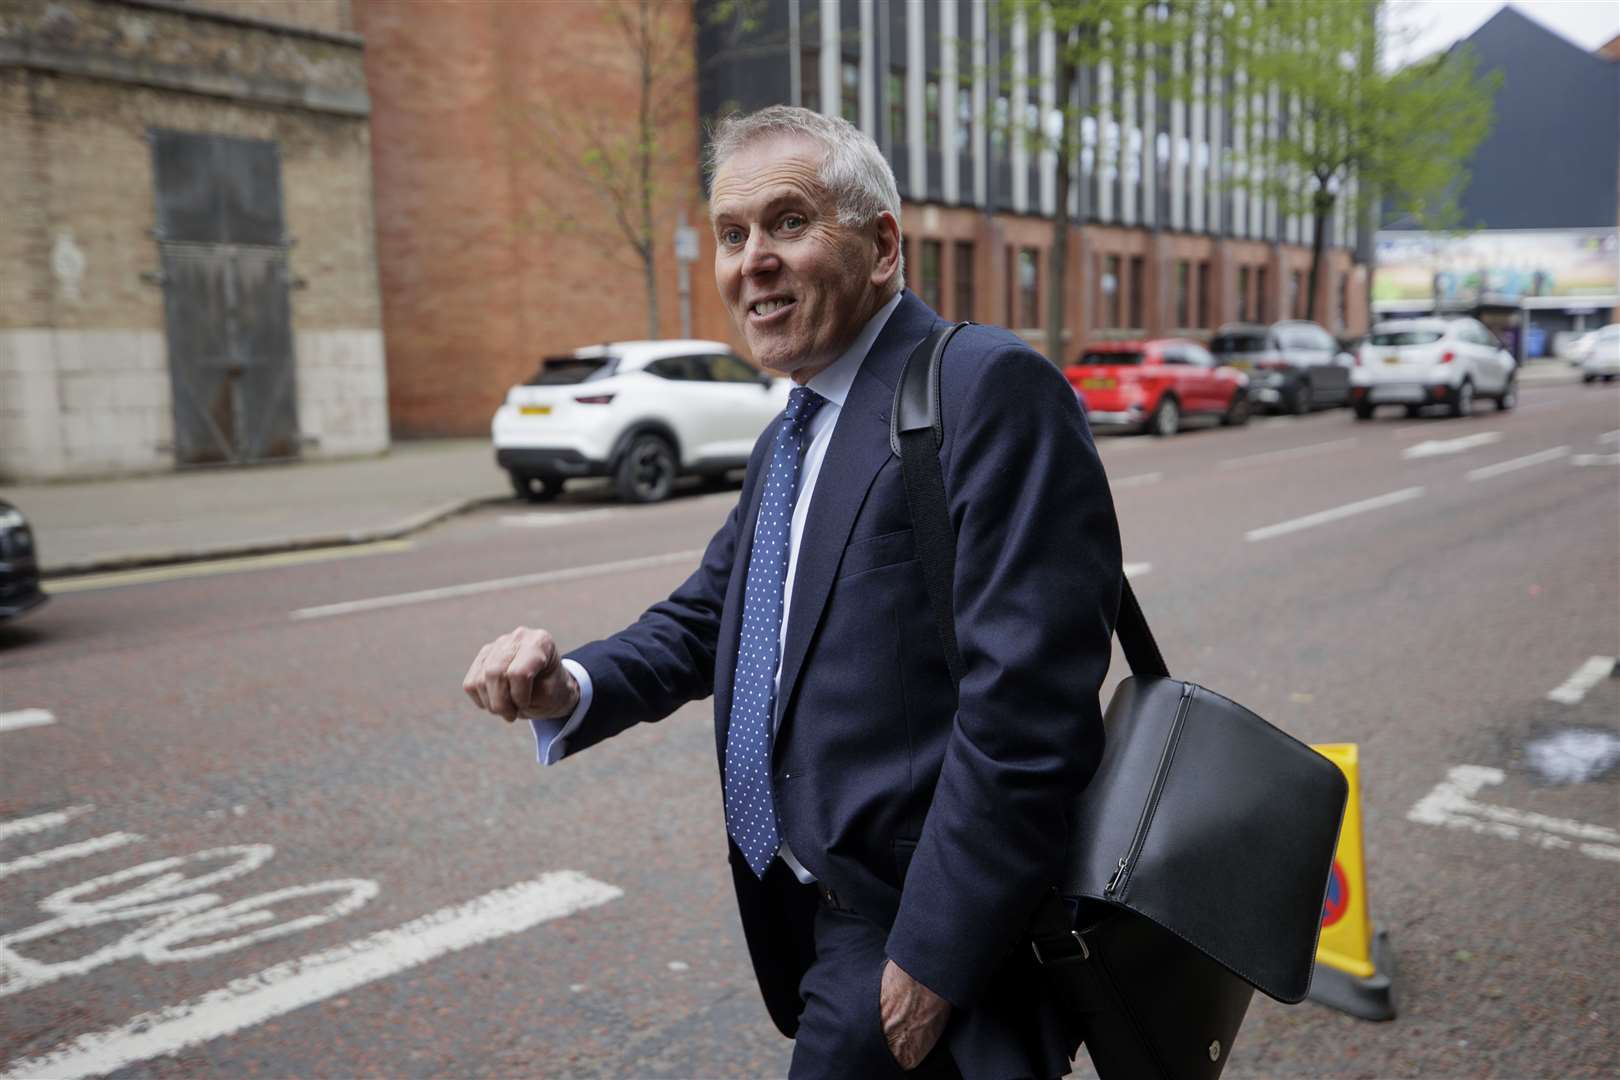 Sir David Sterling leaves the Clayton Hotel in Belfast after giving evidence at the UK Covid-19 Inquiry (Liam McBurney/PA)